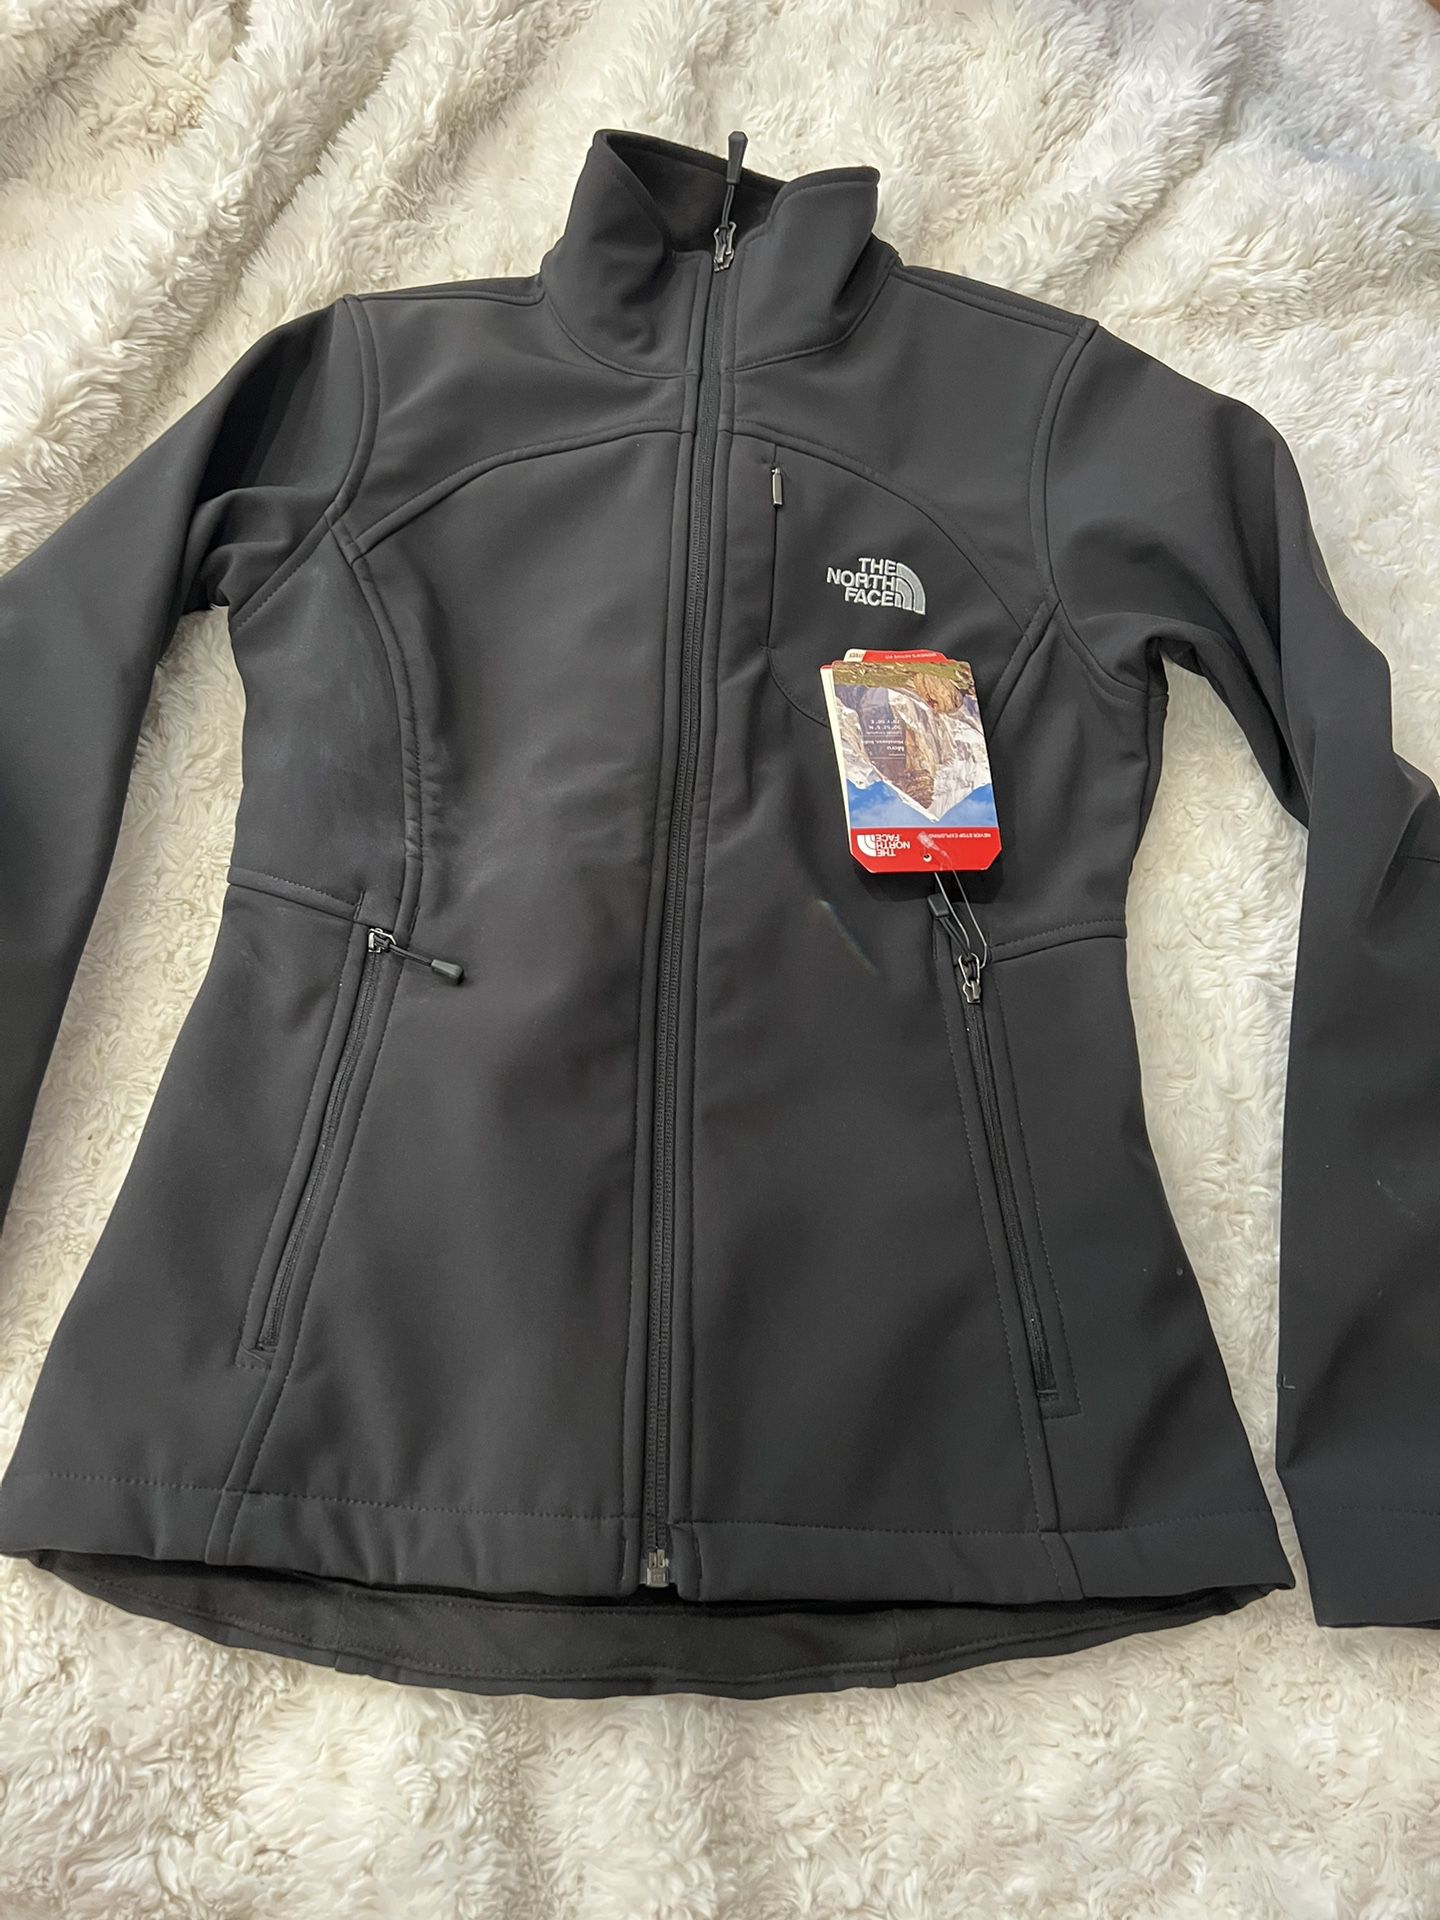 Brand New North Face Jacket 70